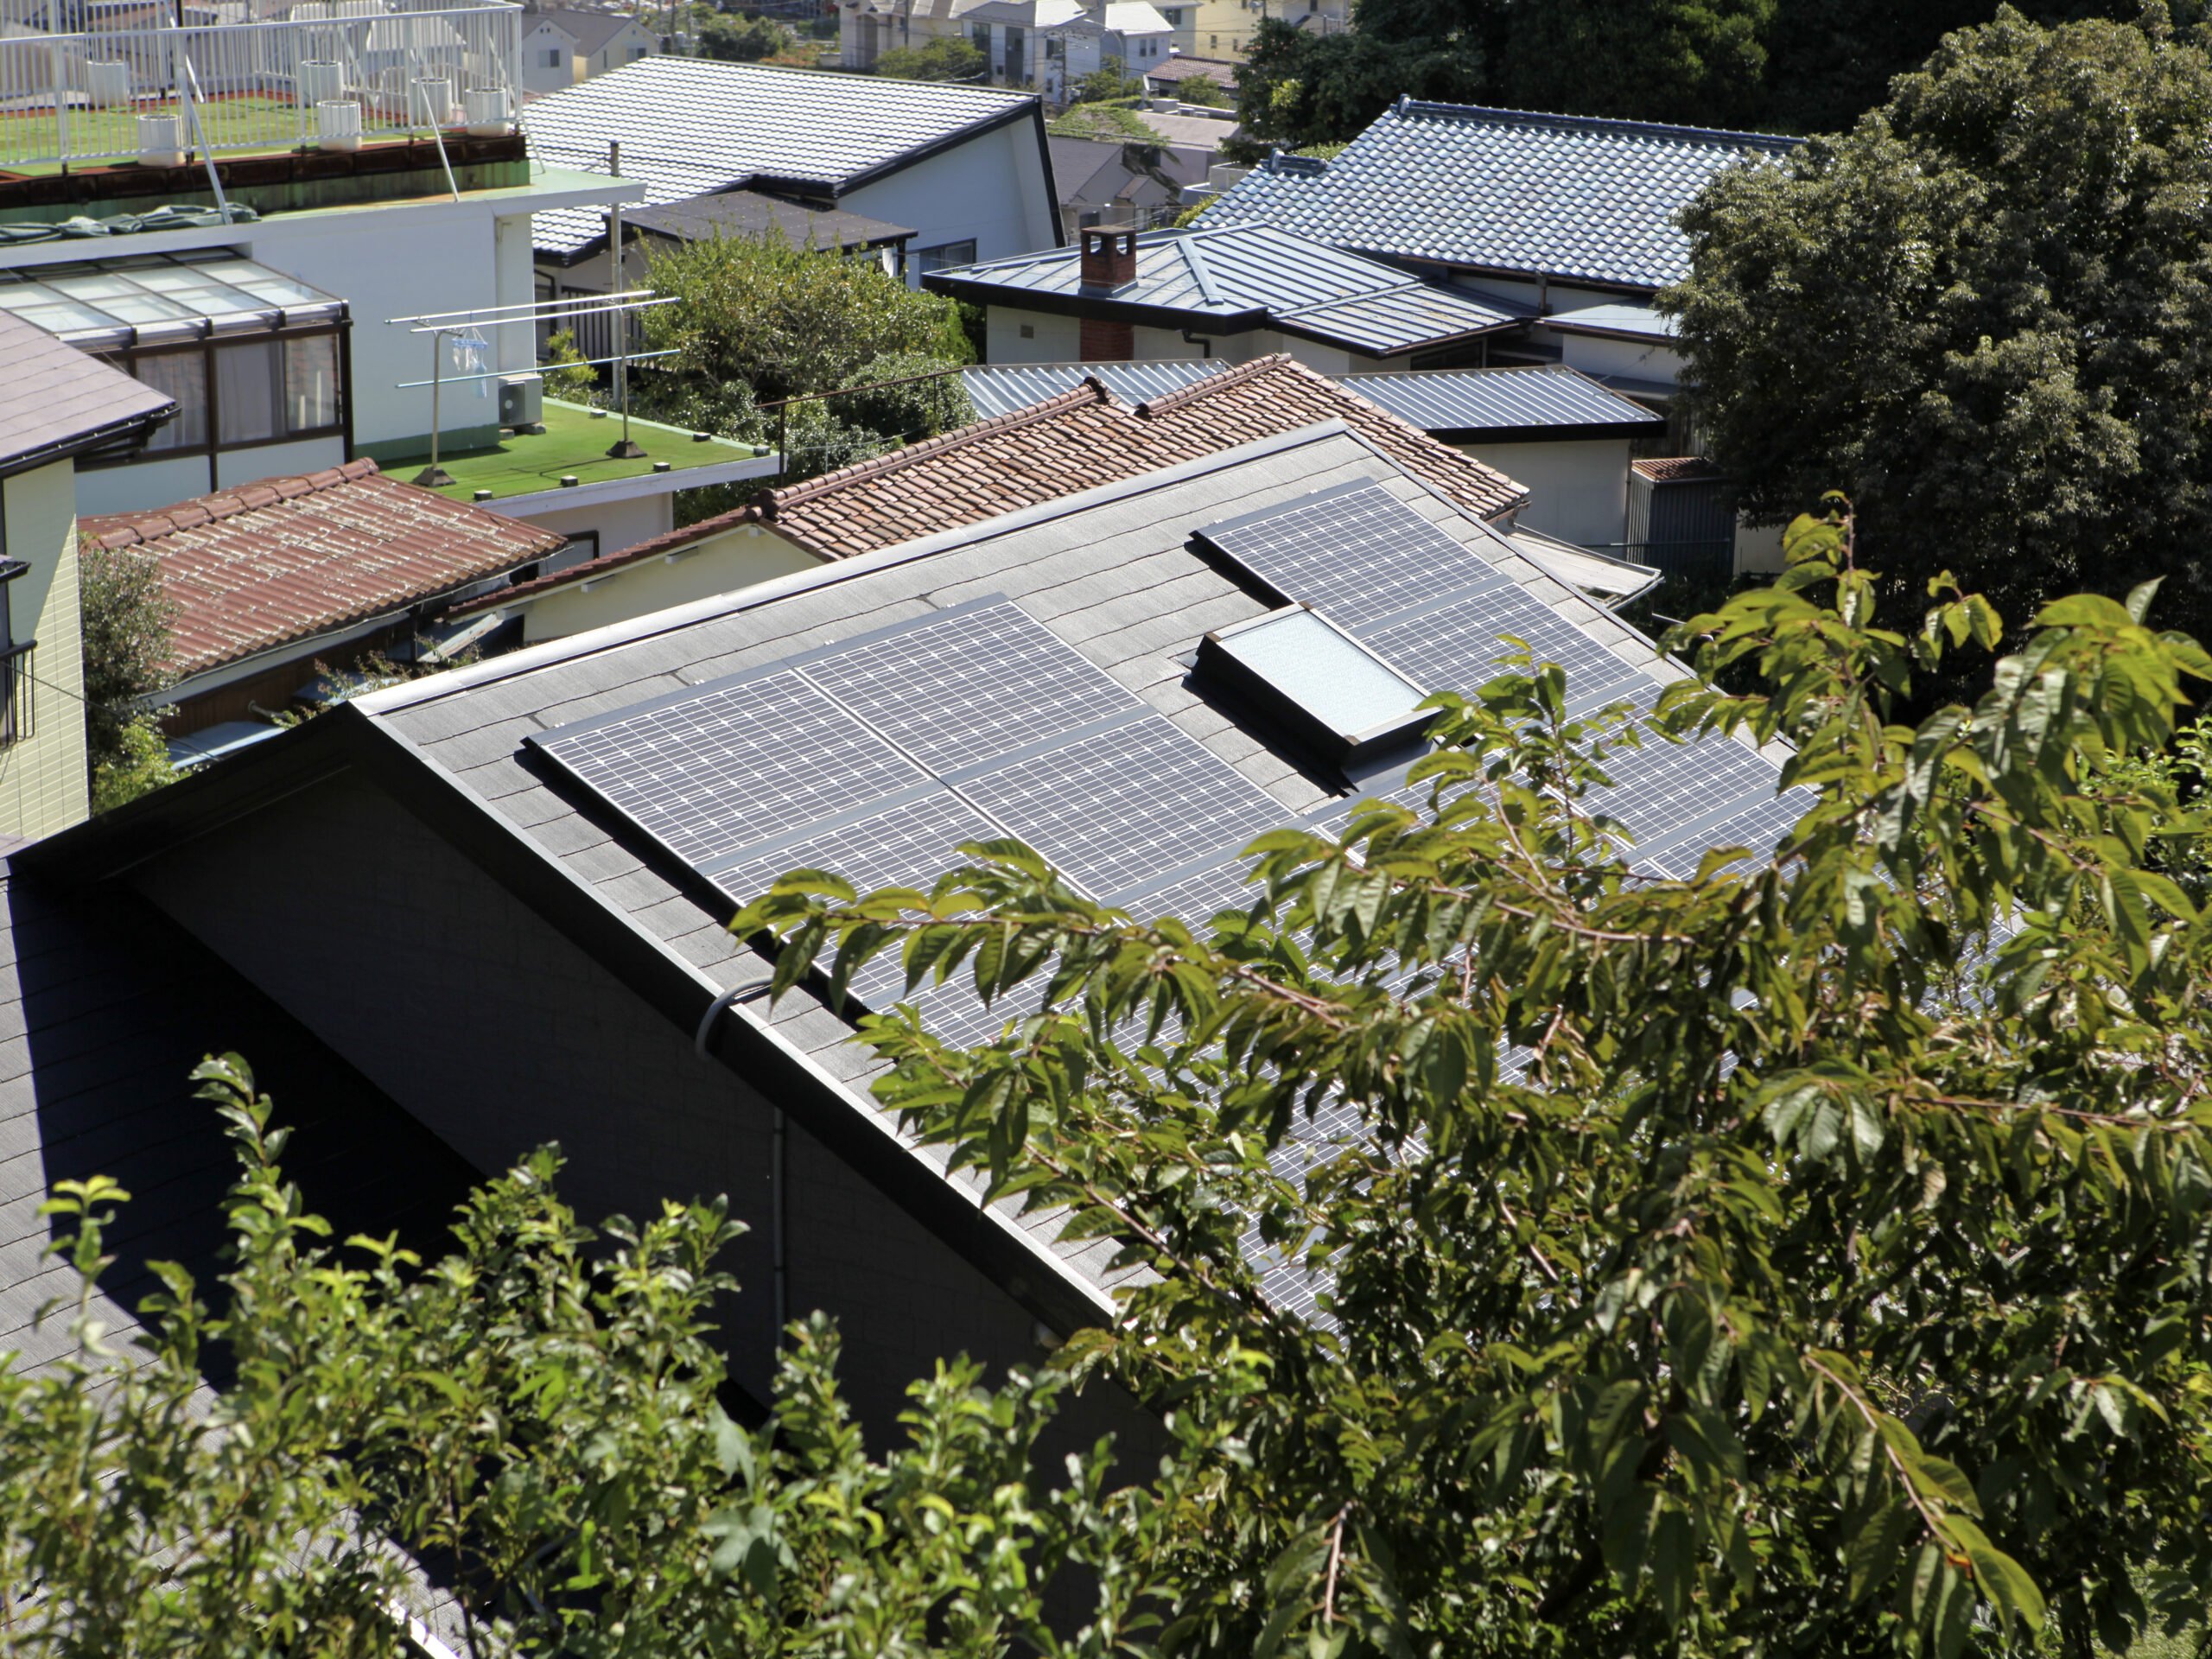 Tokyo will require new housing projects to install solar panels